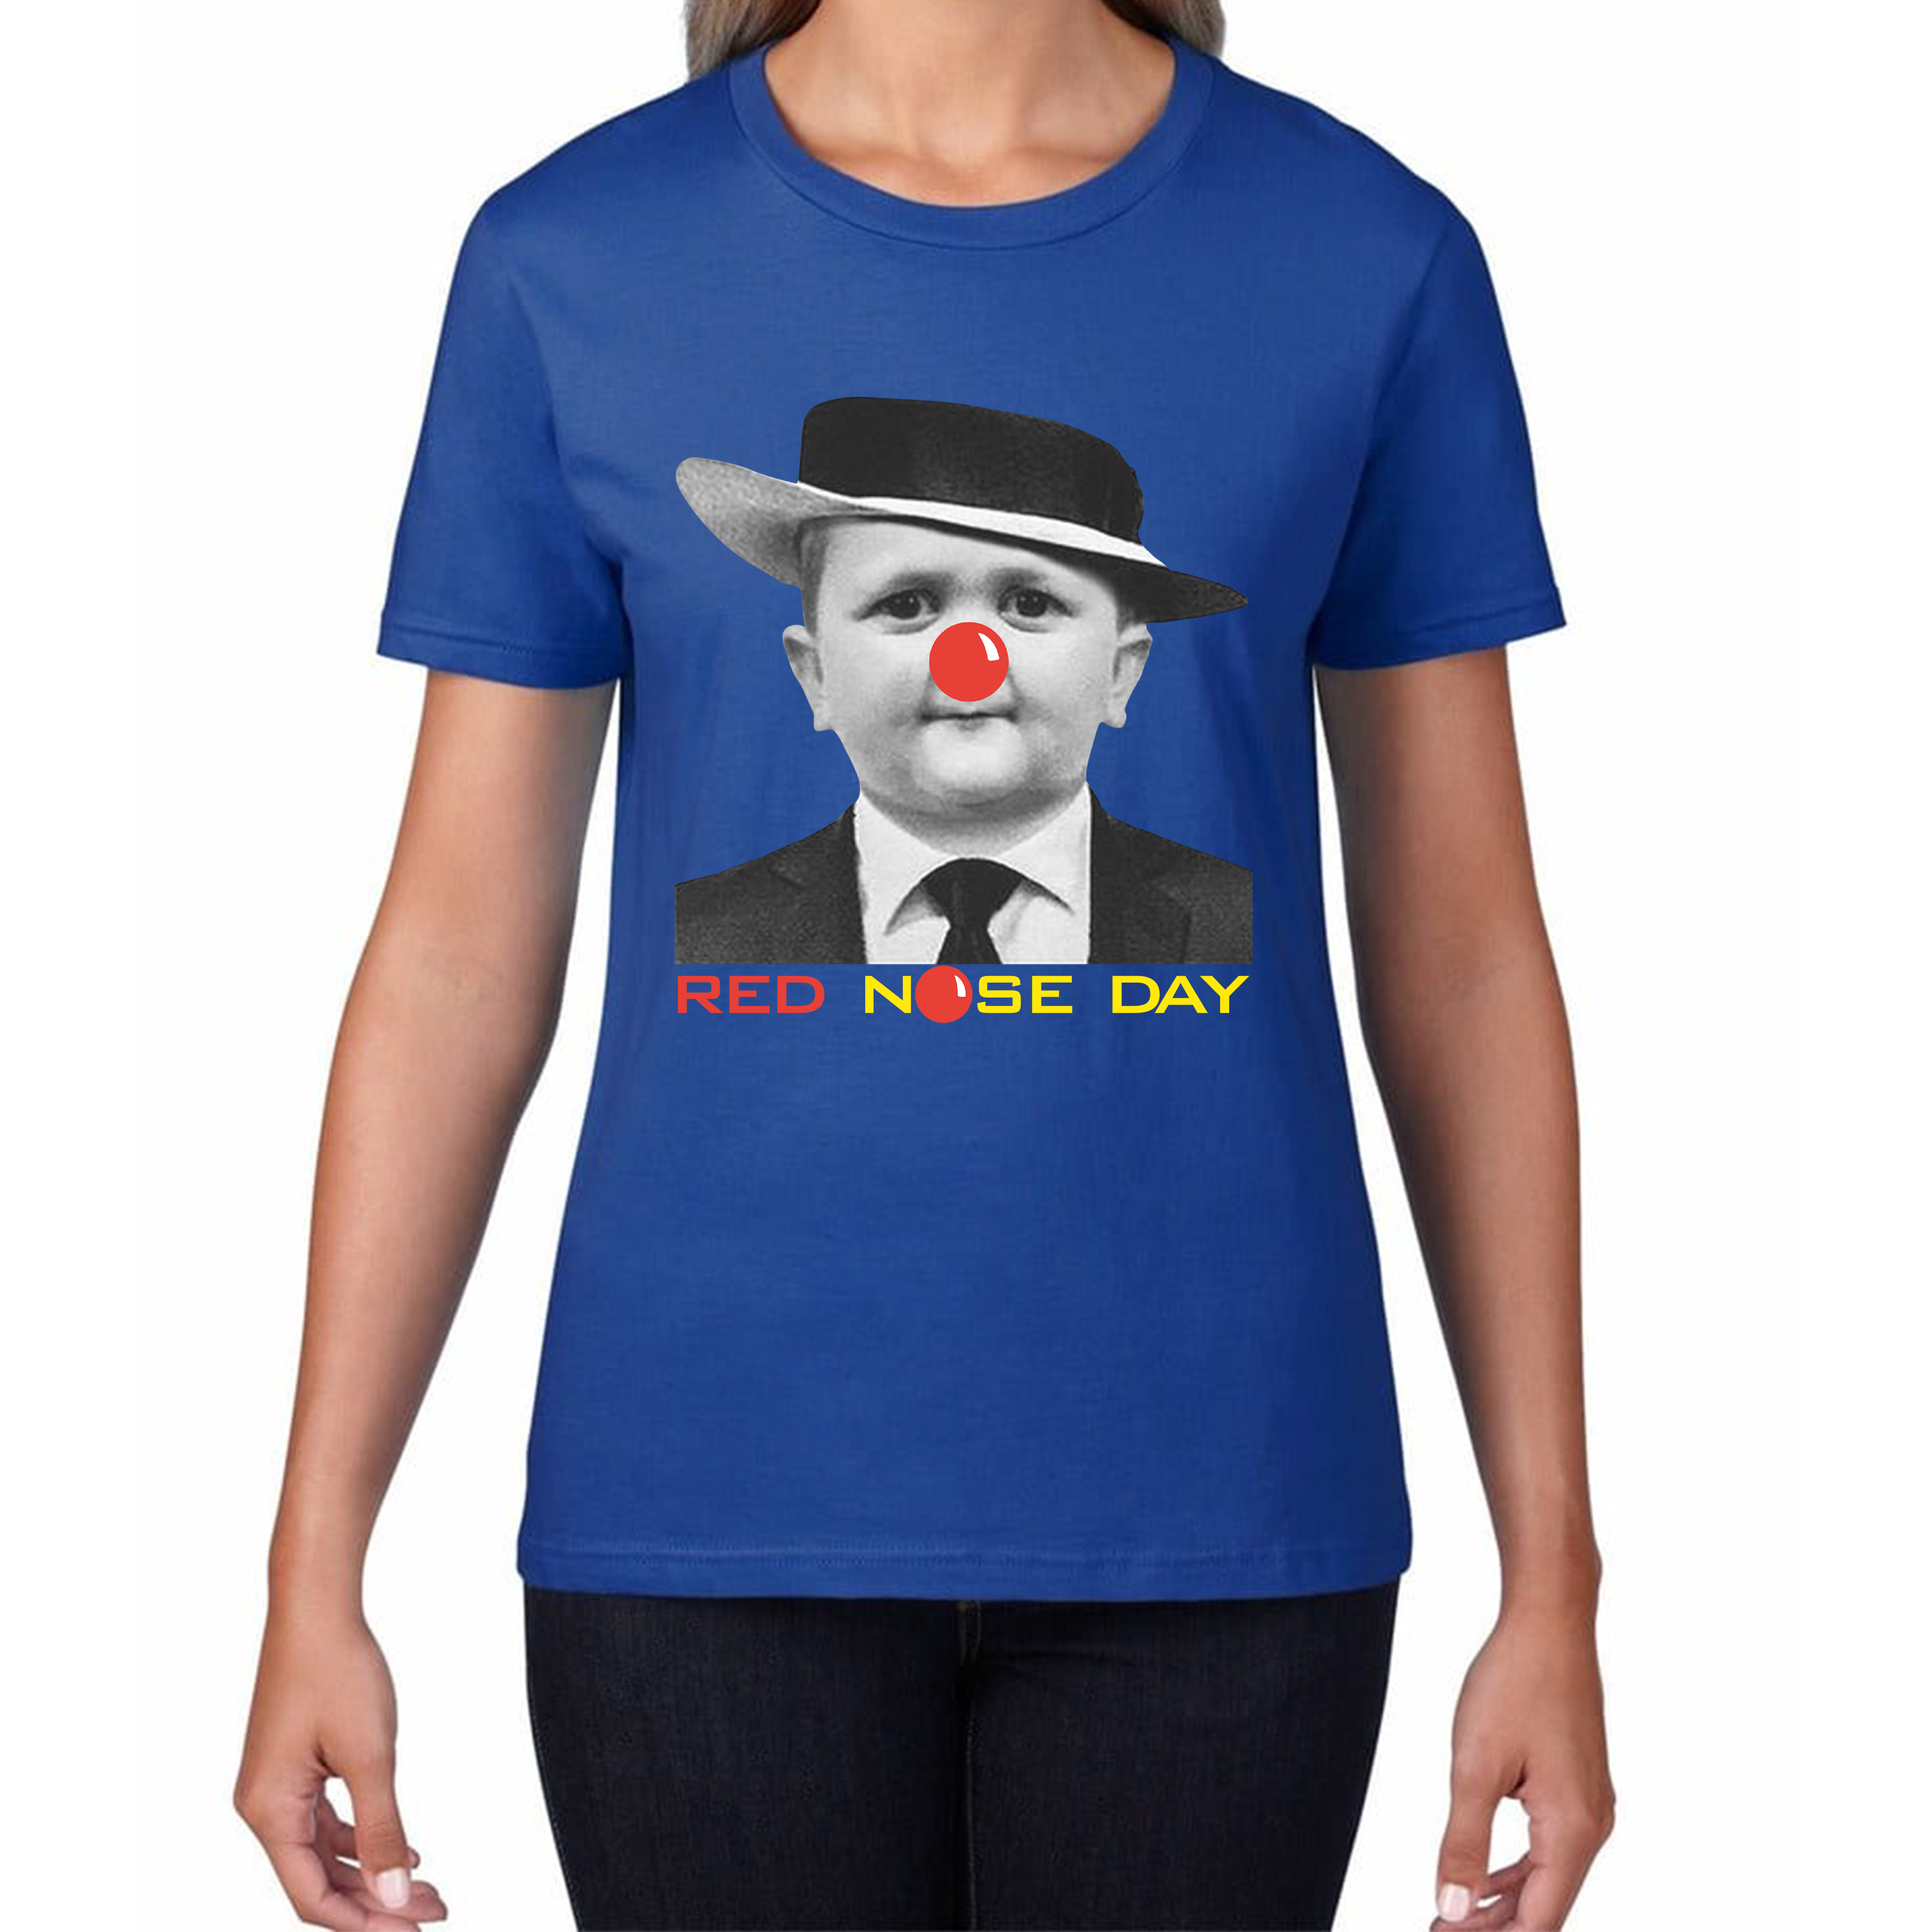 Hasbulla Magomedov MMA Fighter Red Nose Day Ladies T Shirt. 50% Goes To Charity